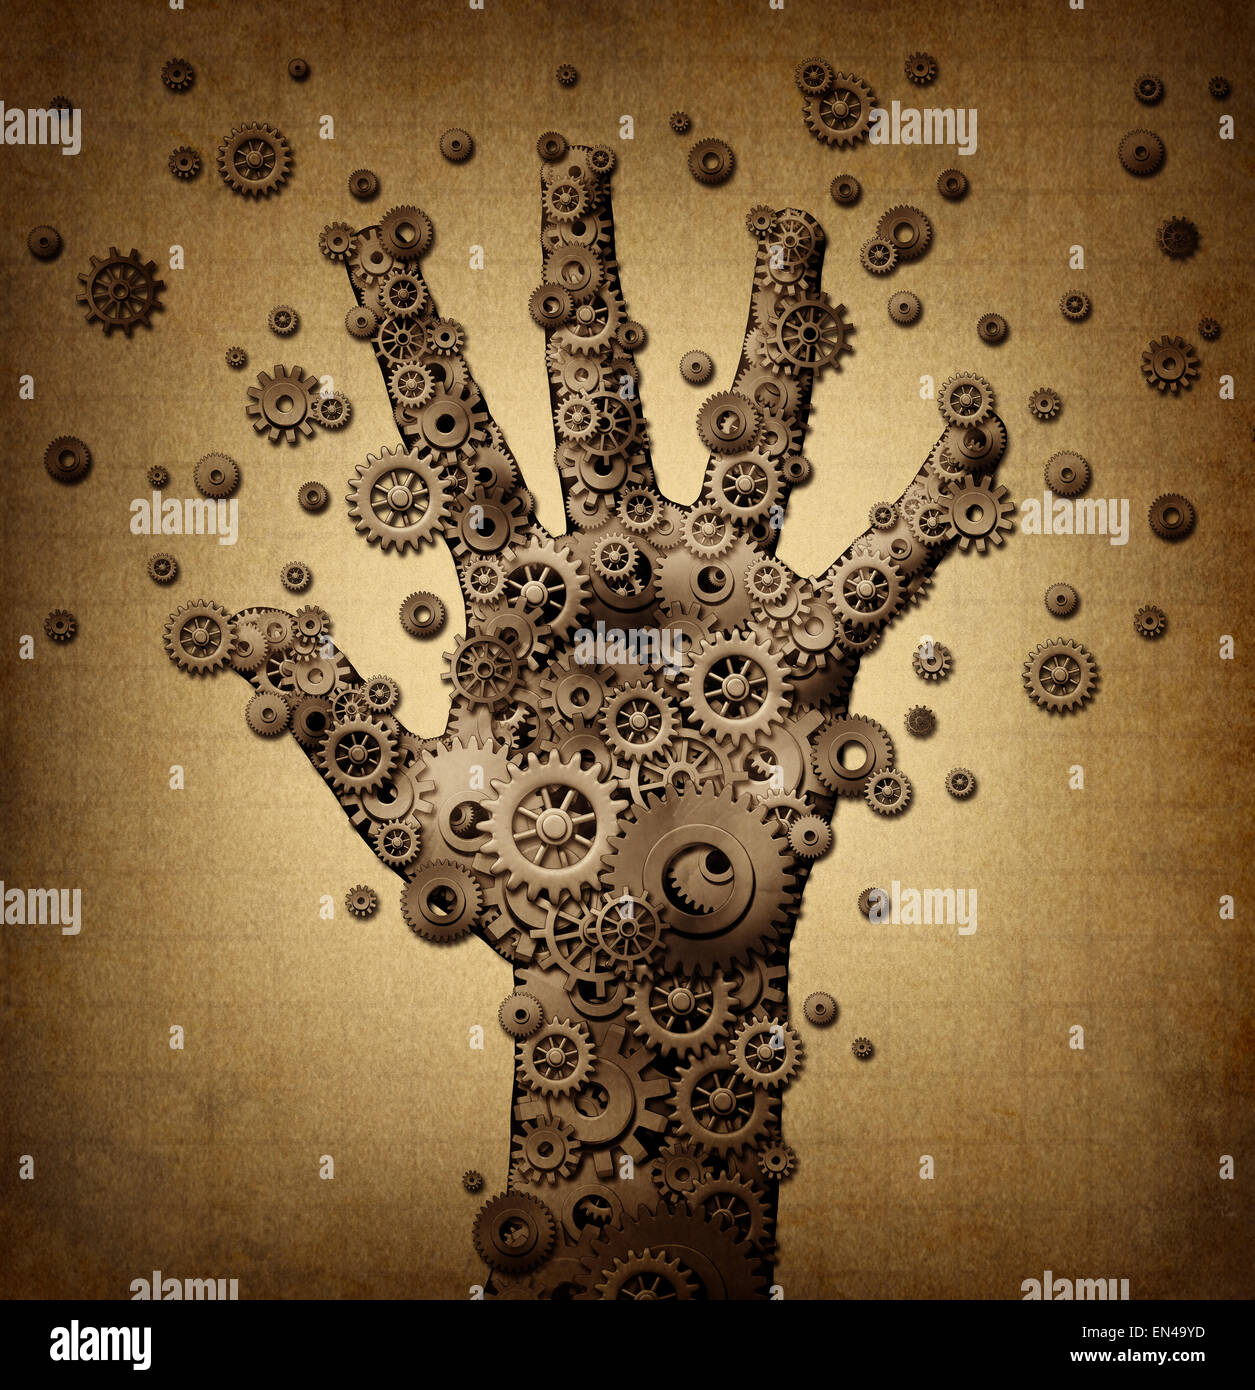 Technology touch concept and robotics or robot symbol as a group of mechanical gears and gog machine wheels shaped as a human hand as a metaphor for bionic engineering or artificial intelligence spread. Stock Photo